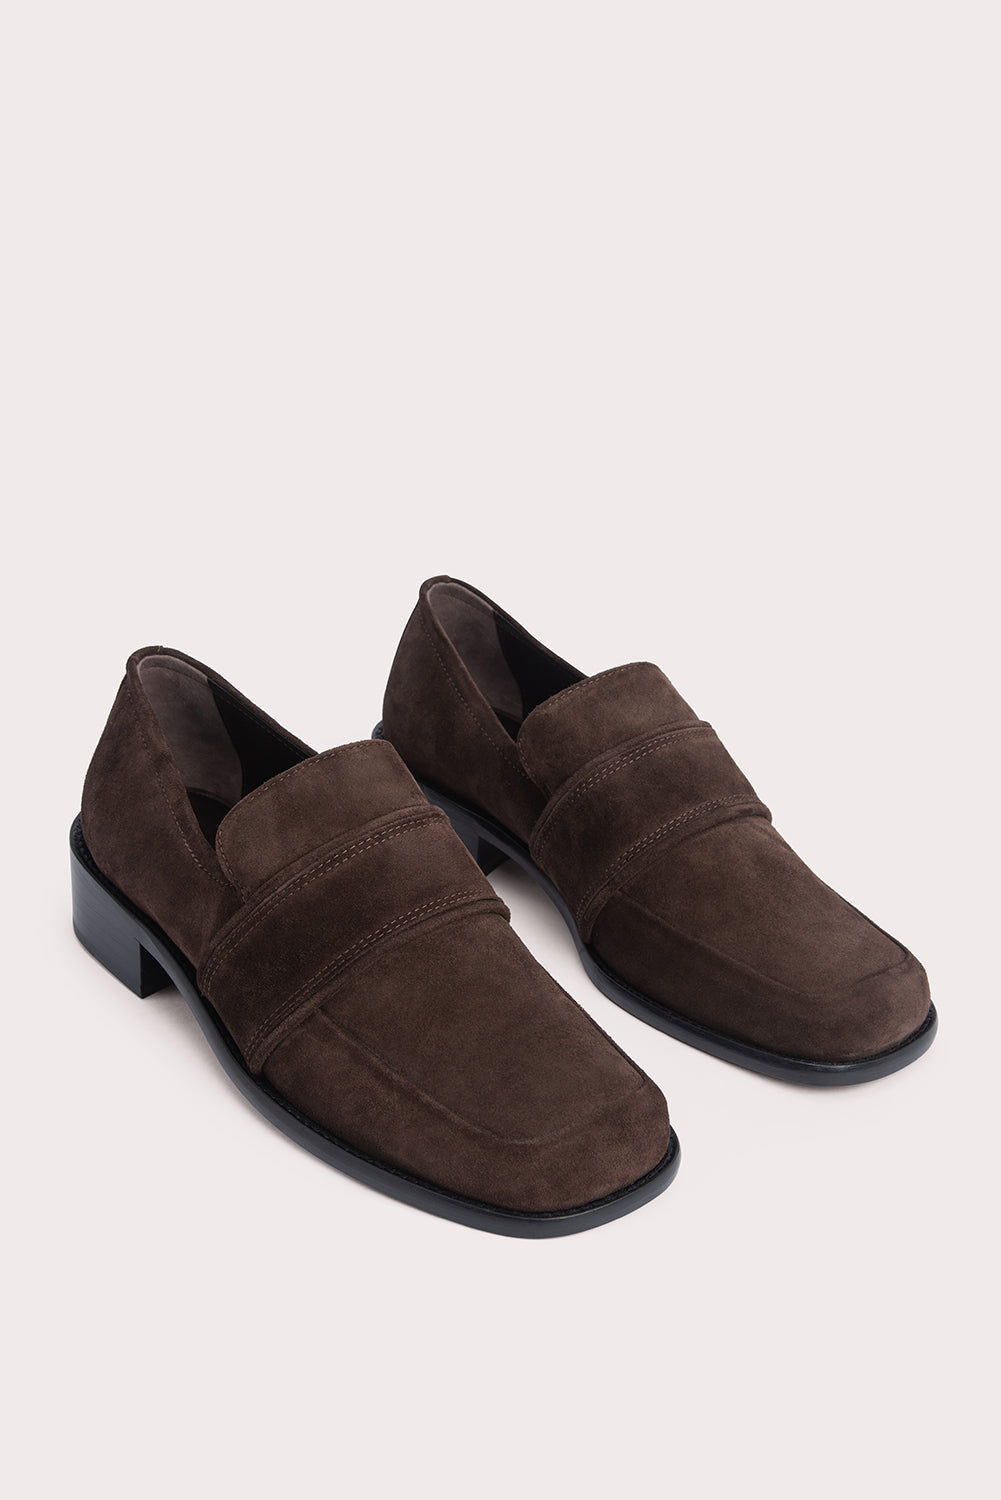 Cyril Bear Suede Leather